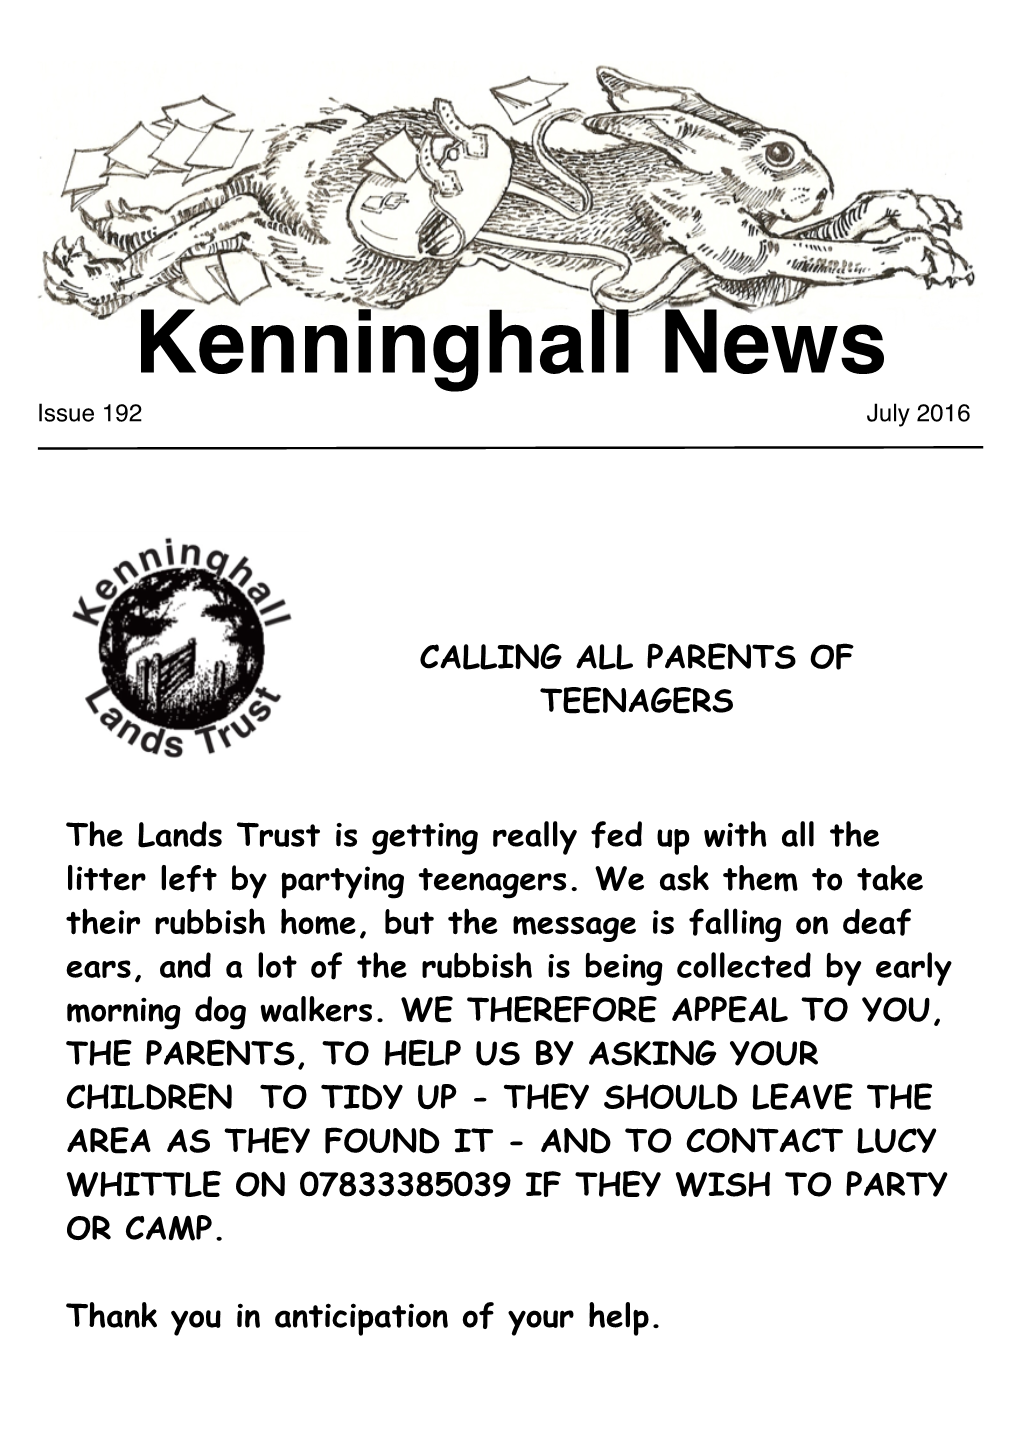 Kenninghall News Issue 192 July 2016